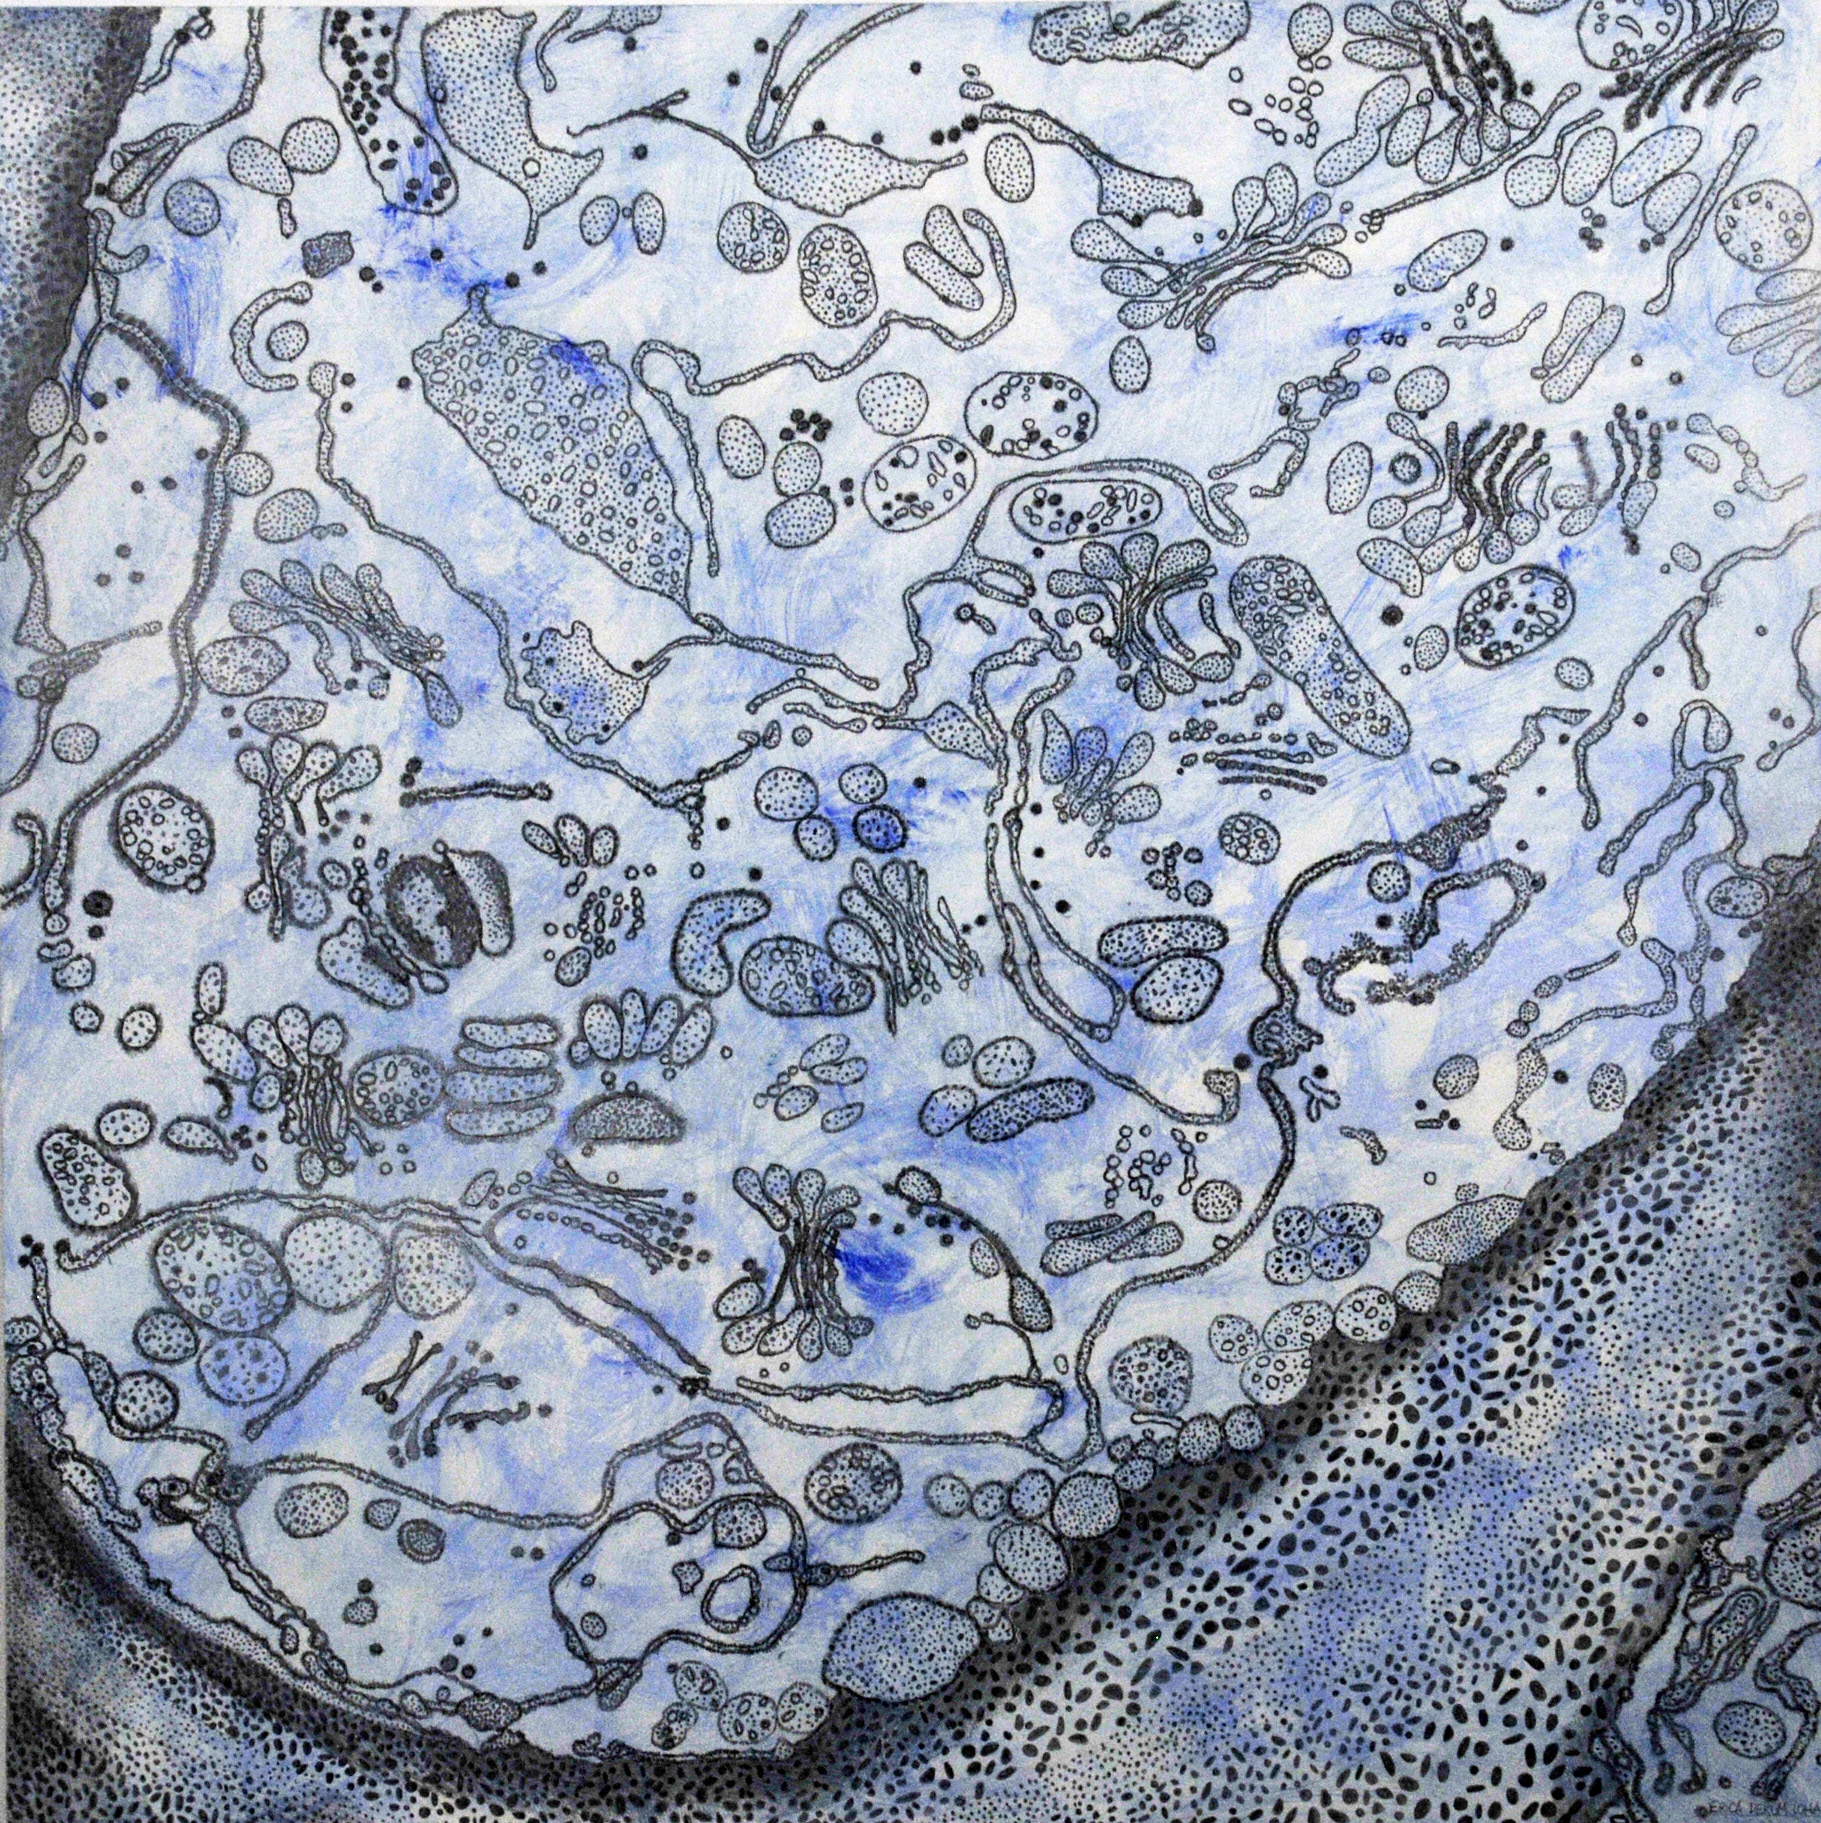   Plant Cell Patterns #7, acrylic and graphite on panel,&nbsp;24x24   